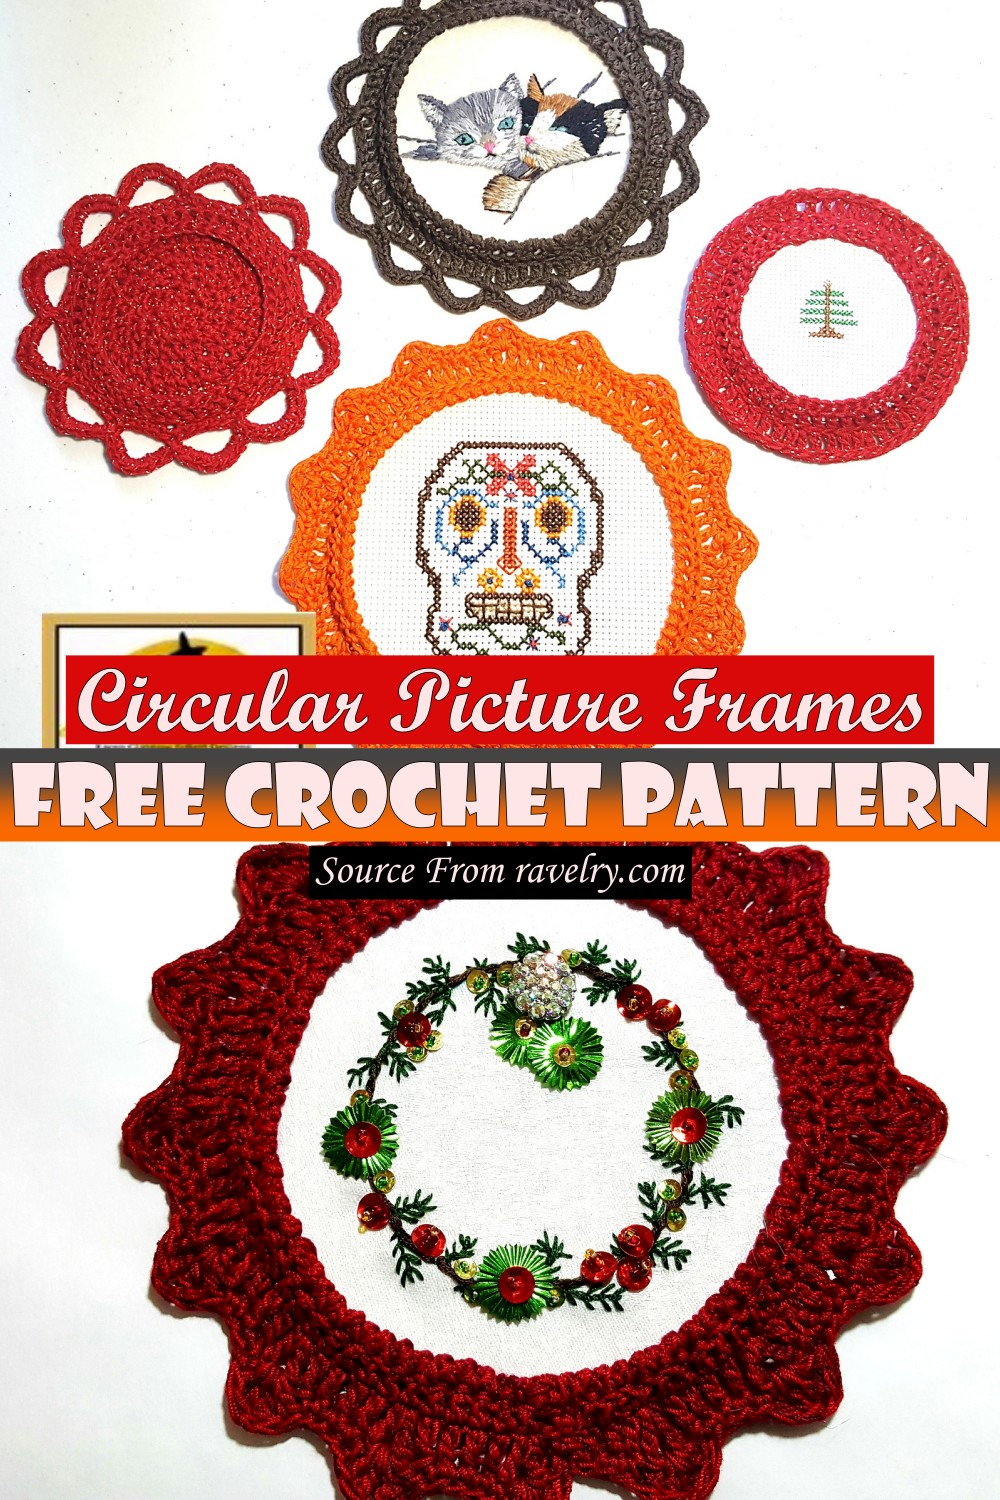 Free Crochet Circular Picture Frames Pattern